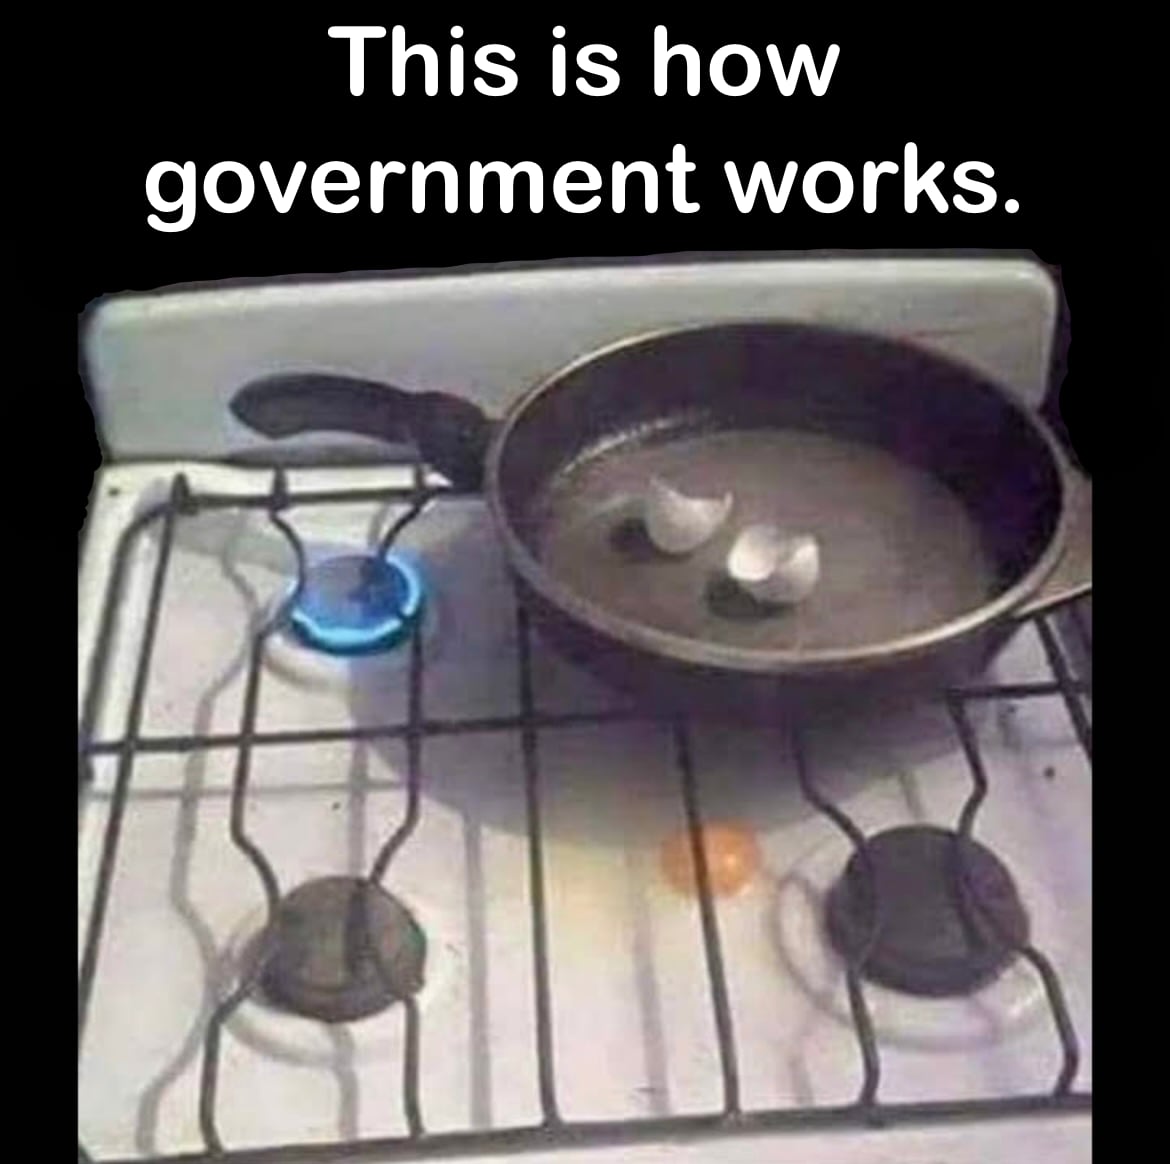 This is how government works